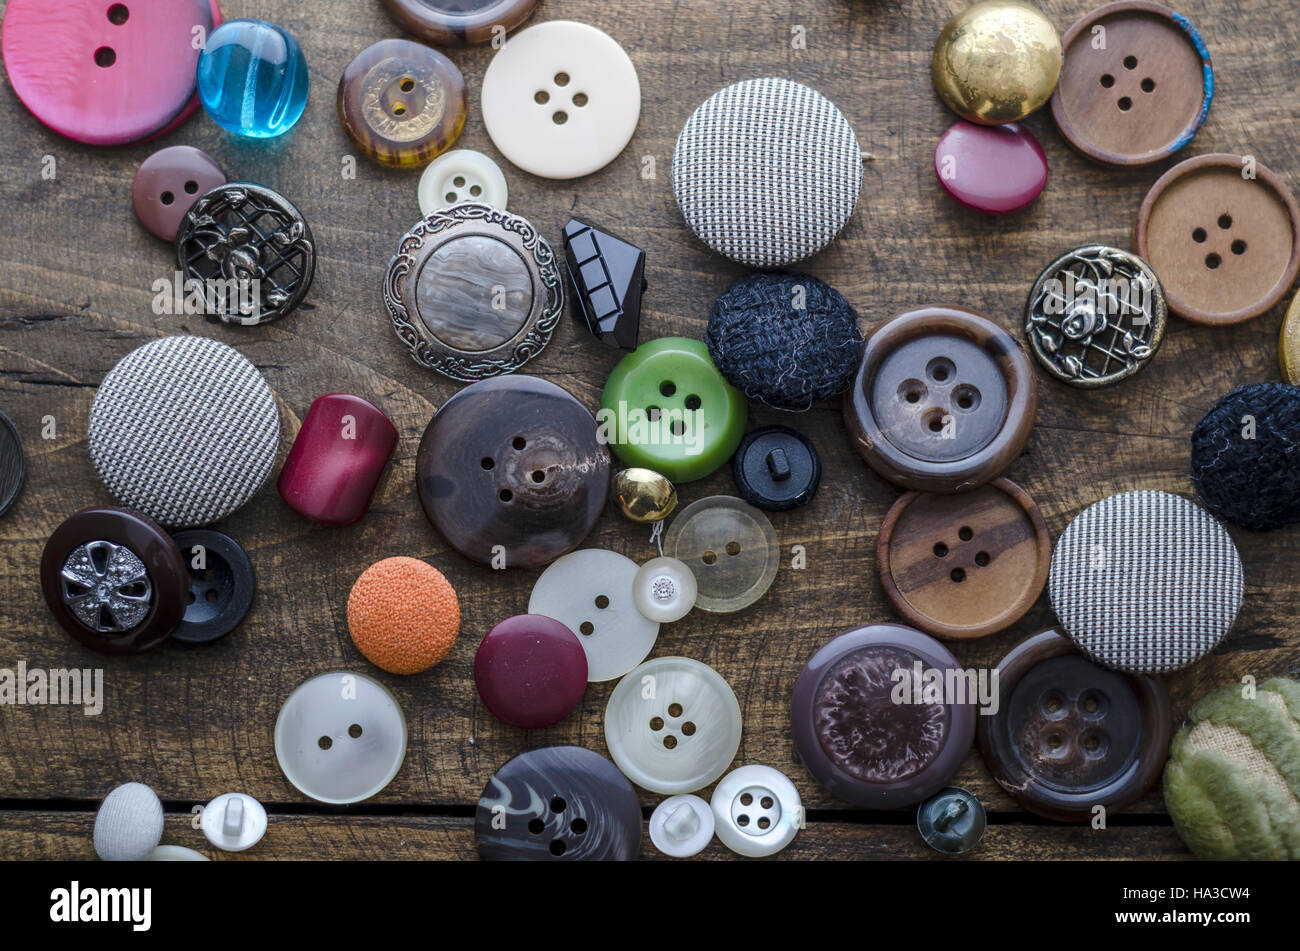 Lot of vintage buttons on old wooden table, from above Stock Photo